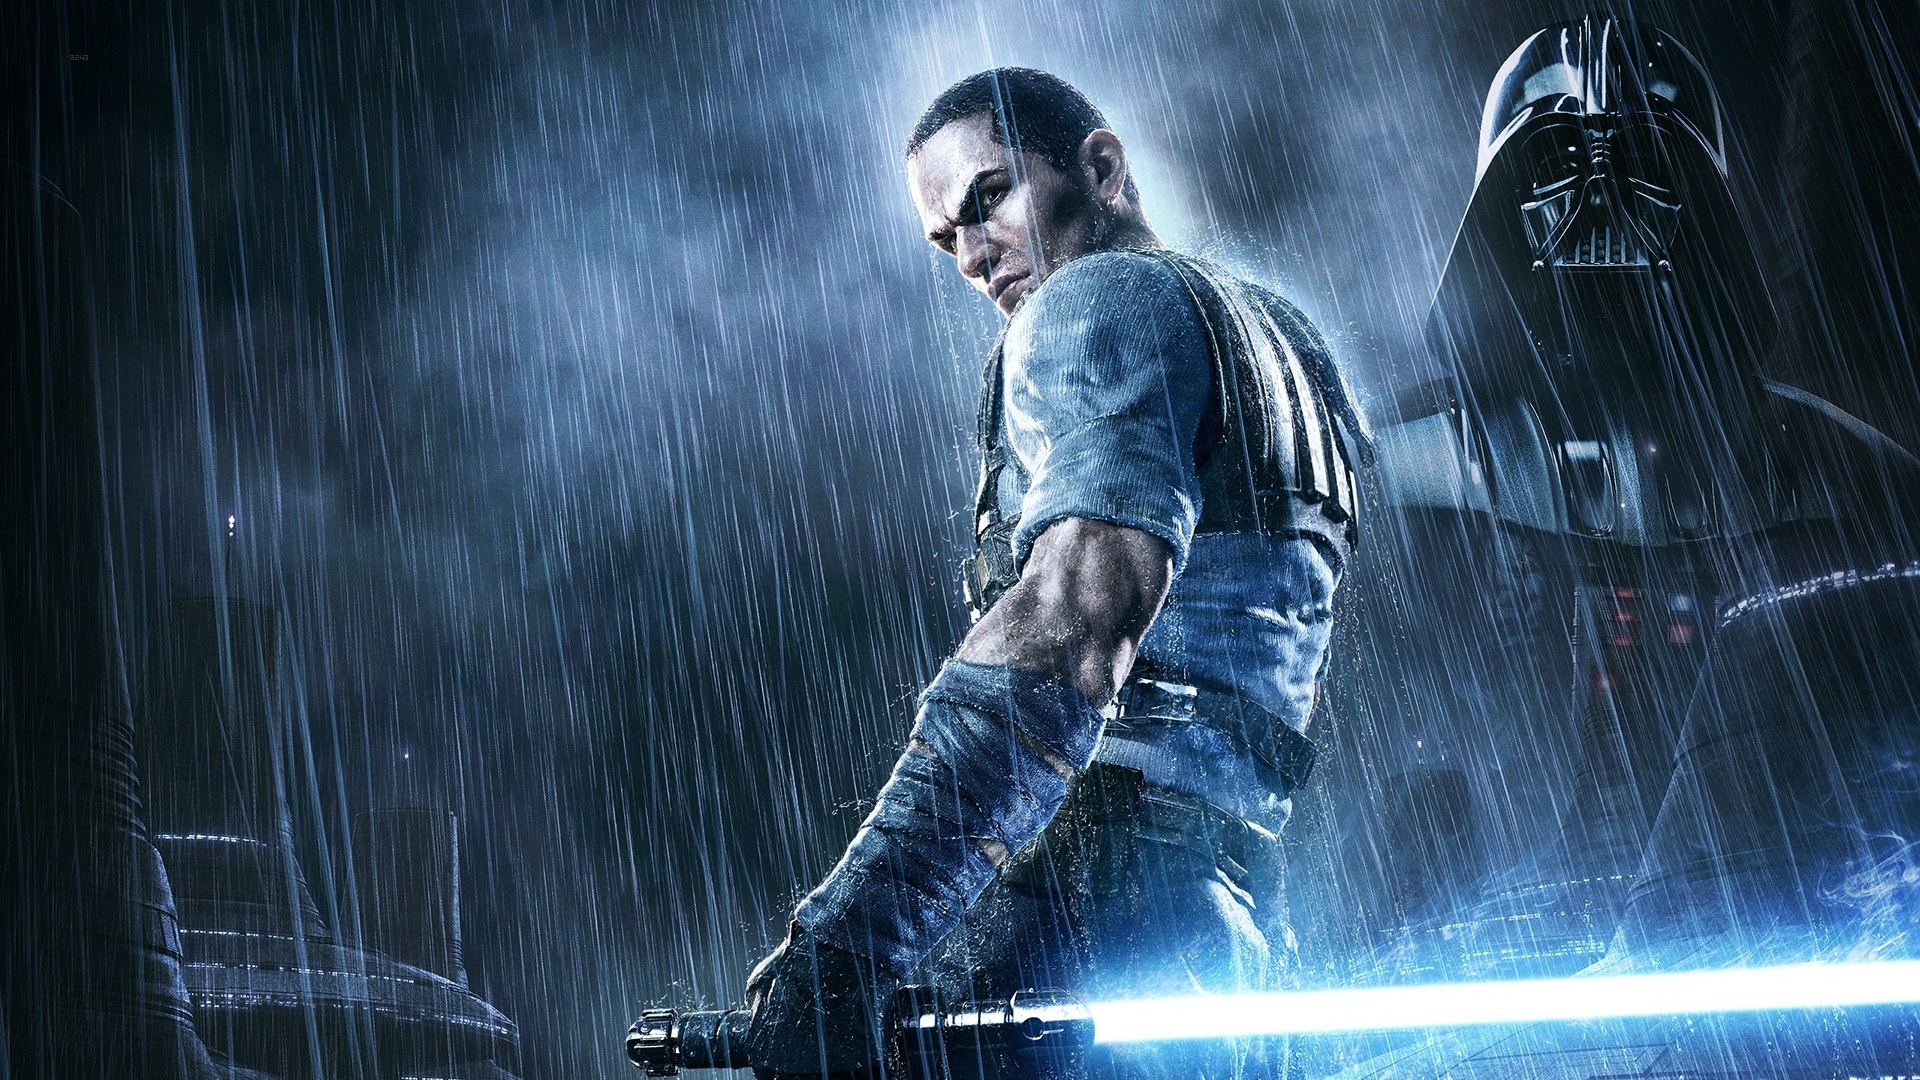 Star Wars The Force Unleashed 2 Wallpapers in HD